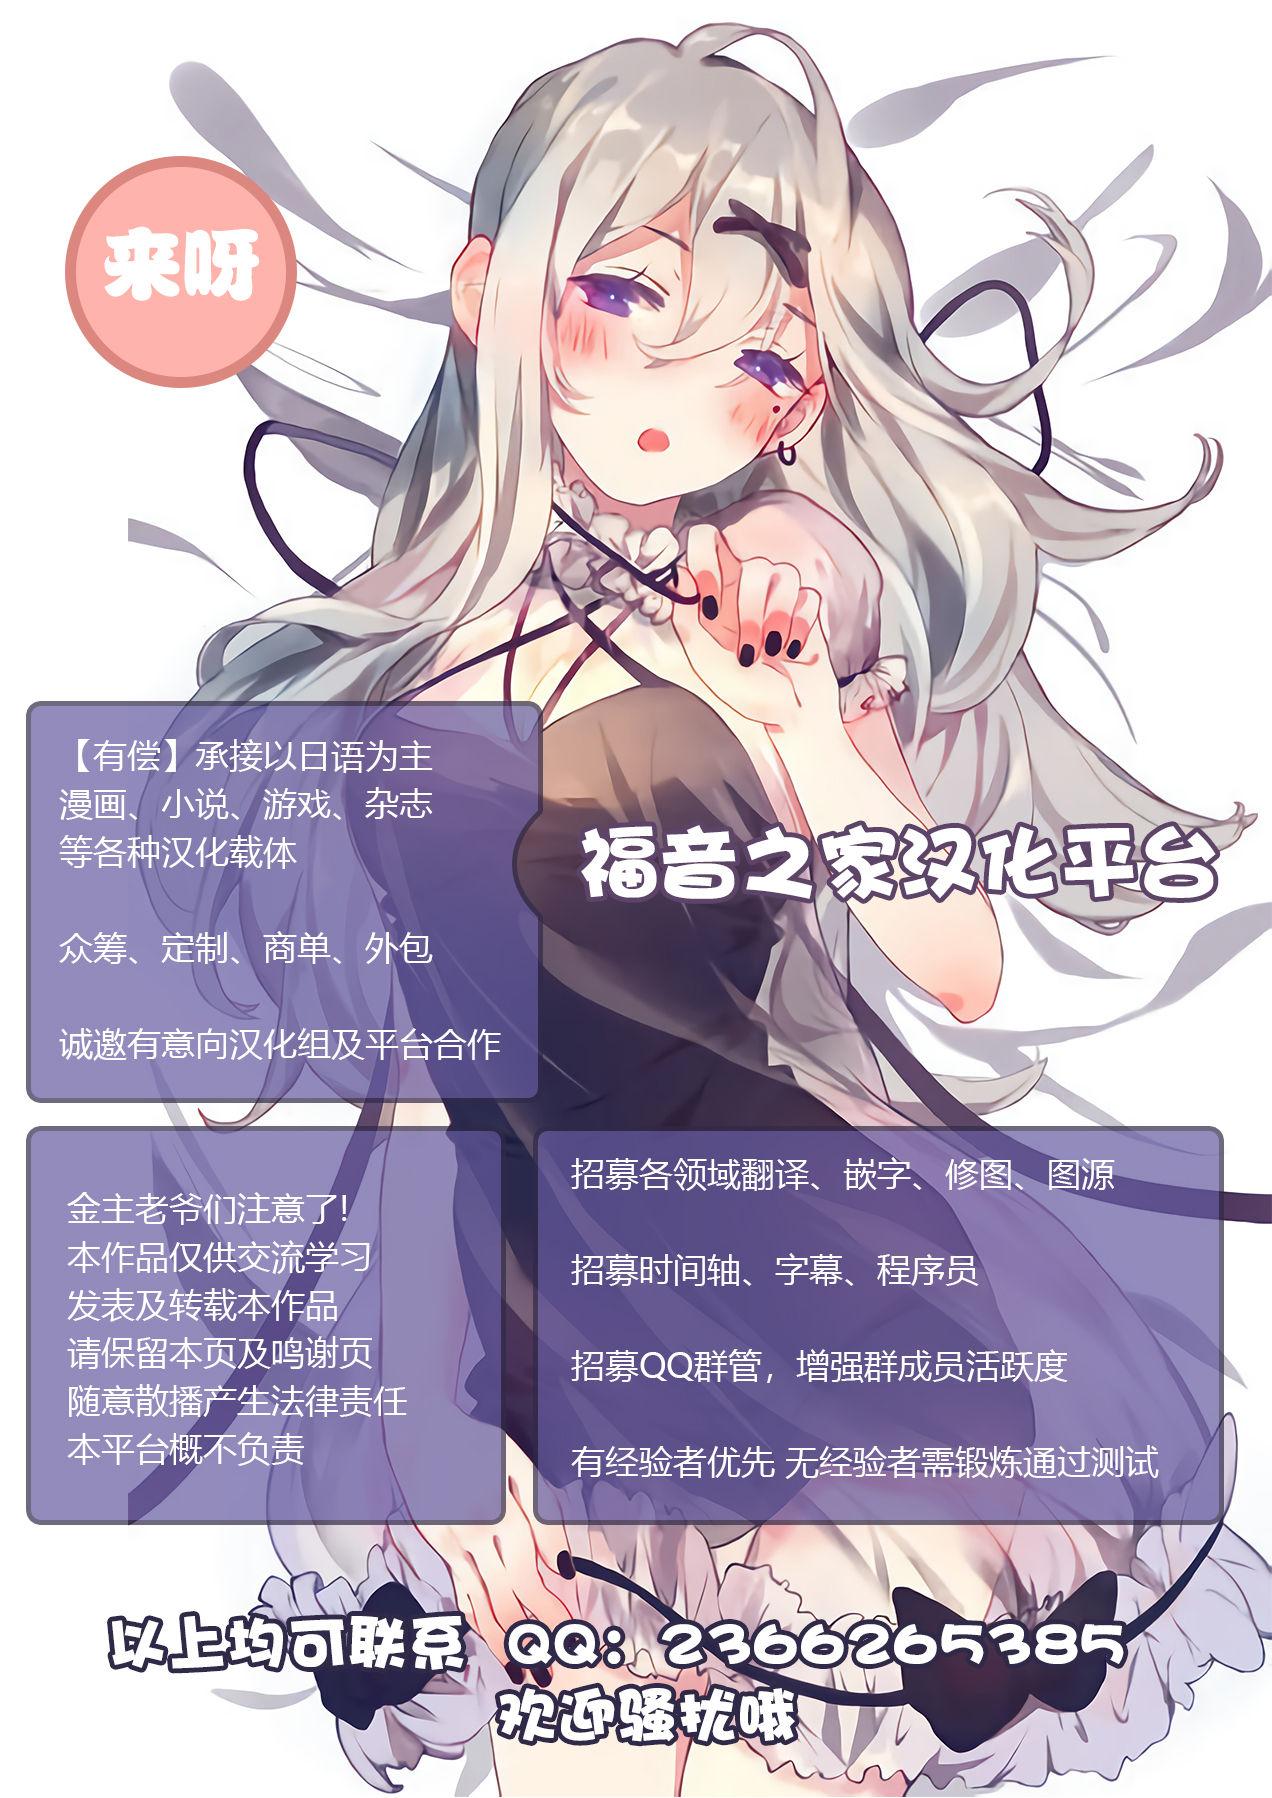 Delicia [Fuusen Club] Haha Mamire Ch. 9 [Chinese]【不可视汉化】 Bottom - Page 25